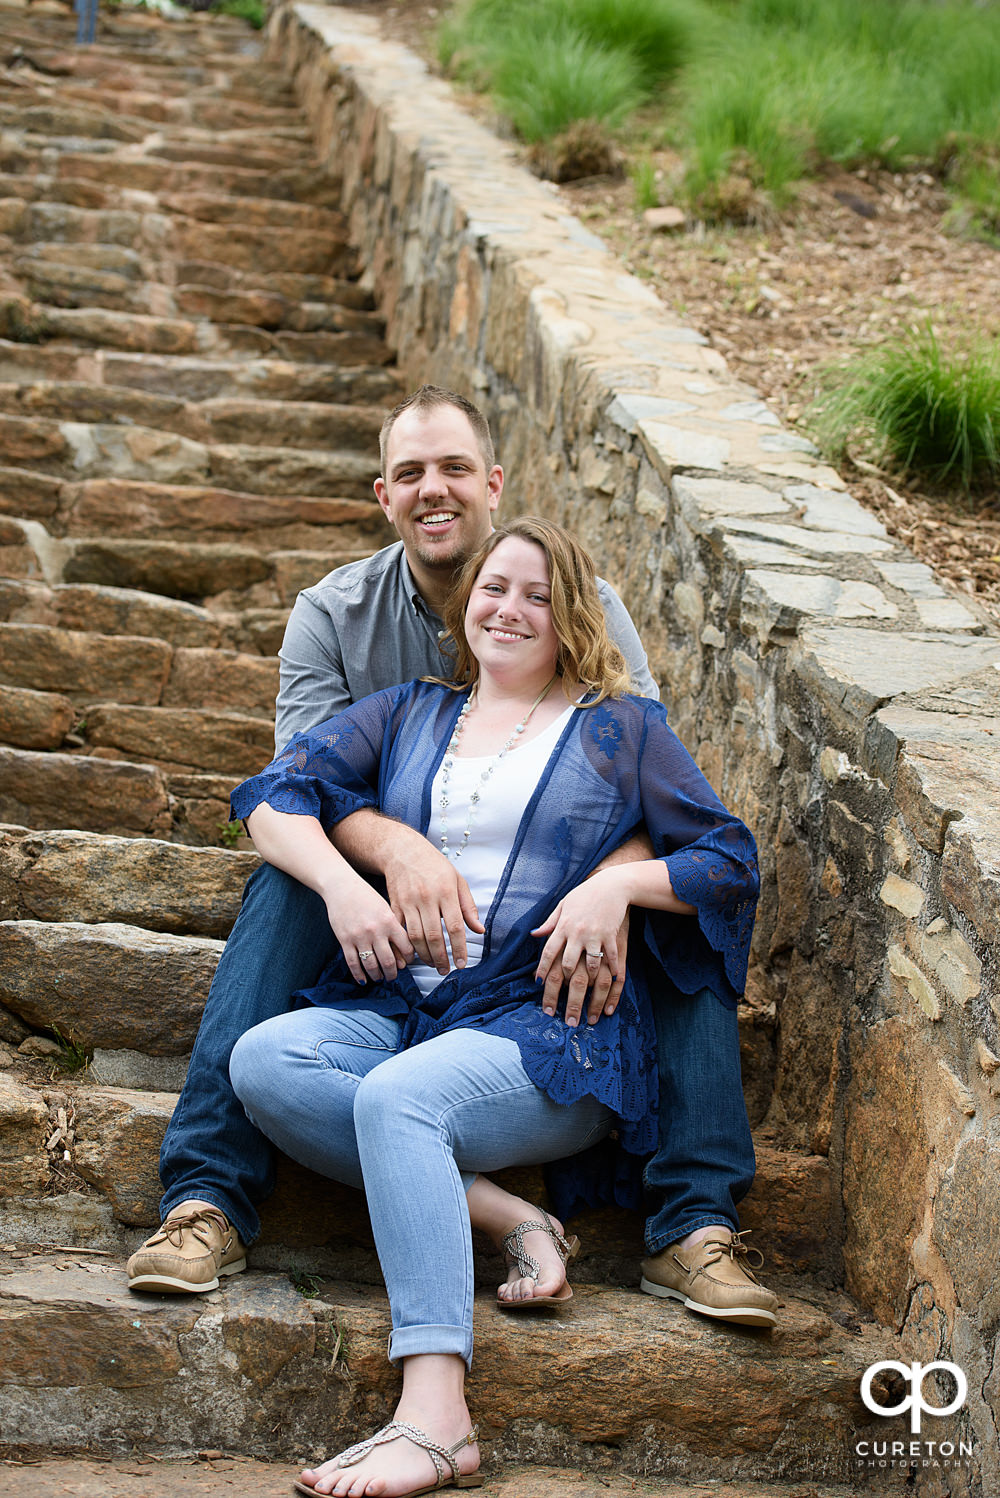 Future bride and groom having an engagement session in downtown Greenville SC at Falls Park.